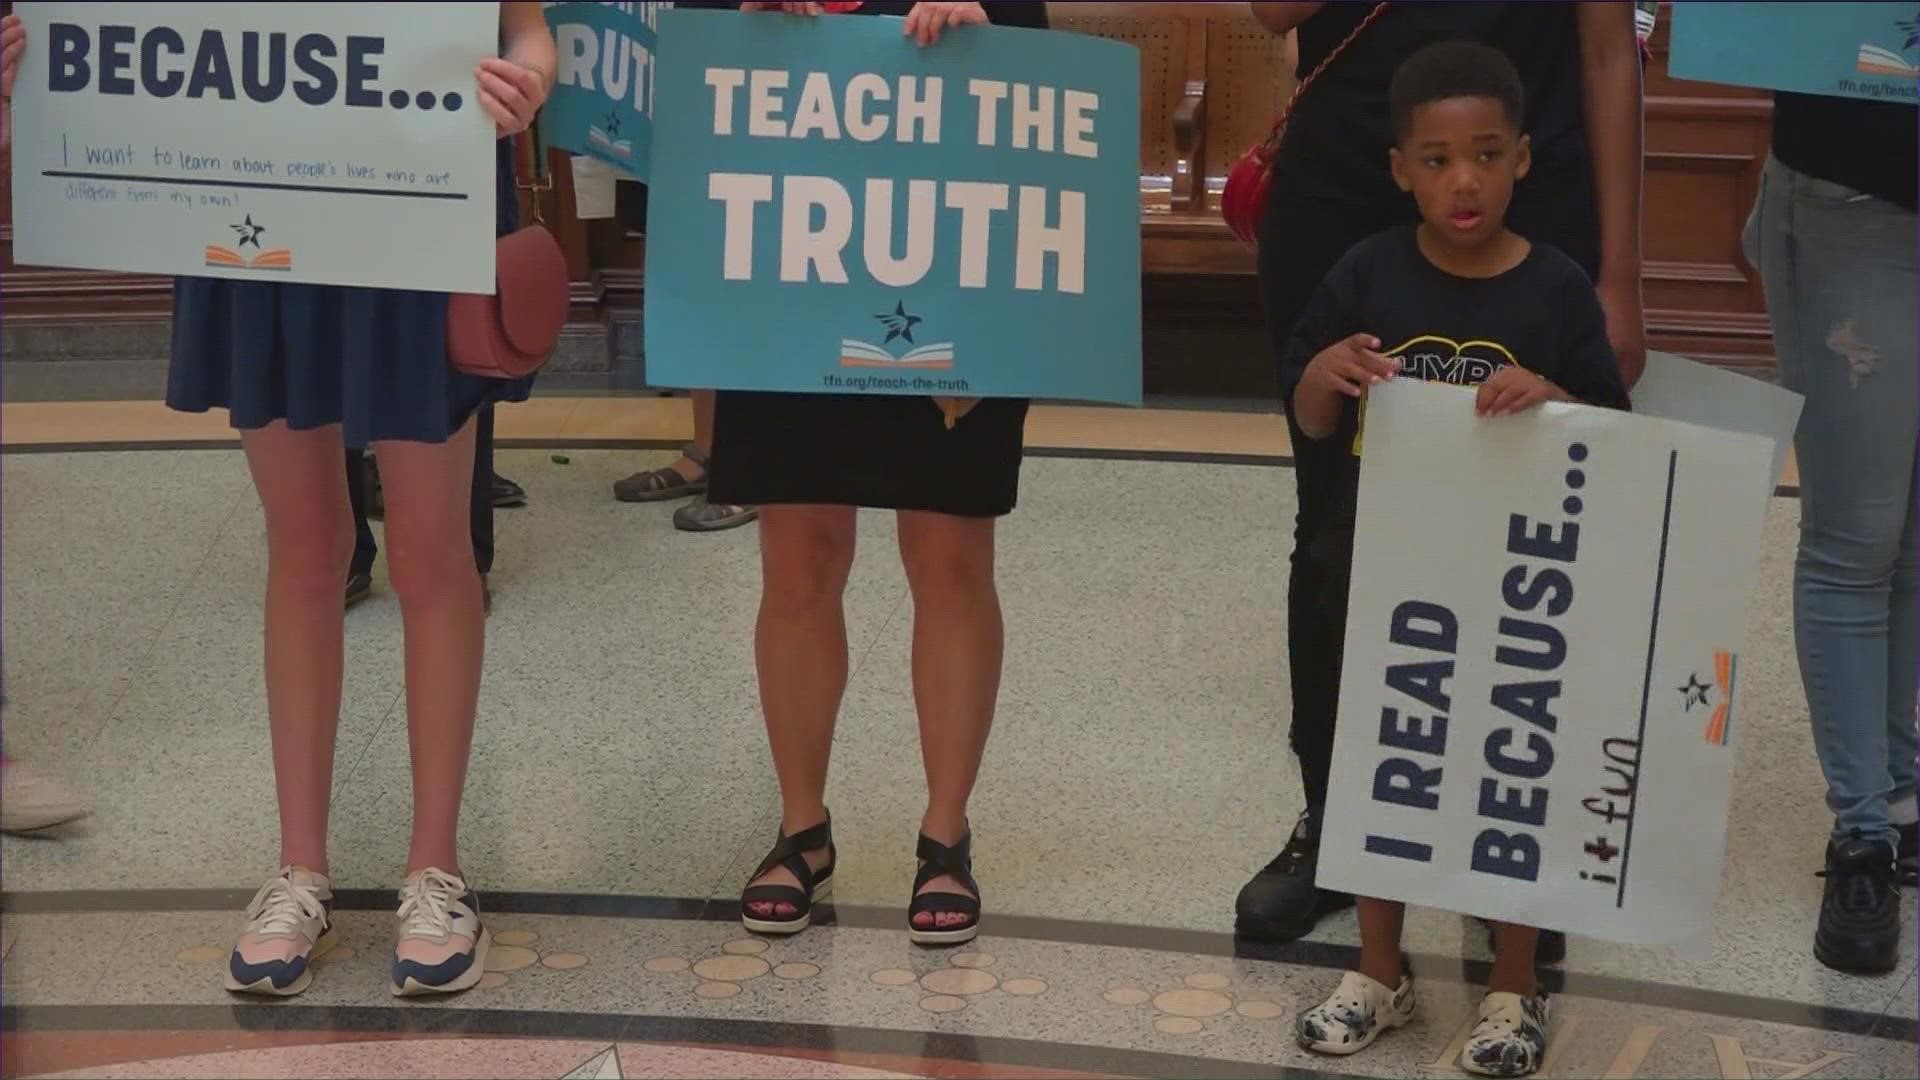 The coalition protested book bans during a Committee on Public Education meeting.